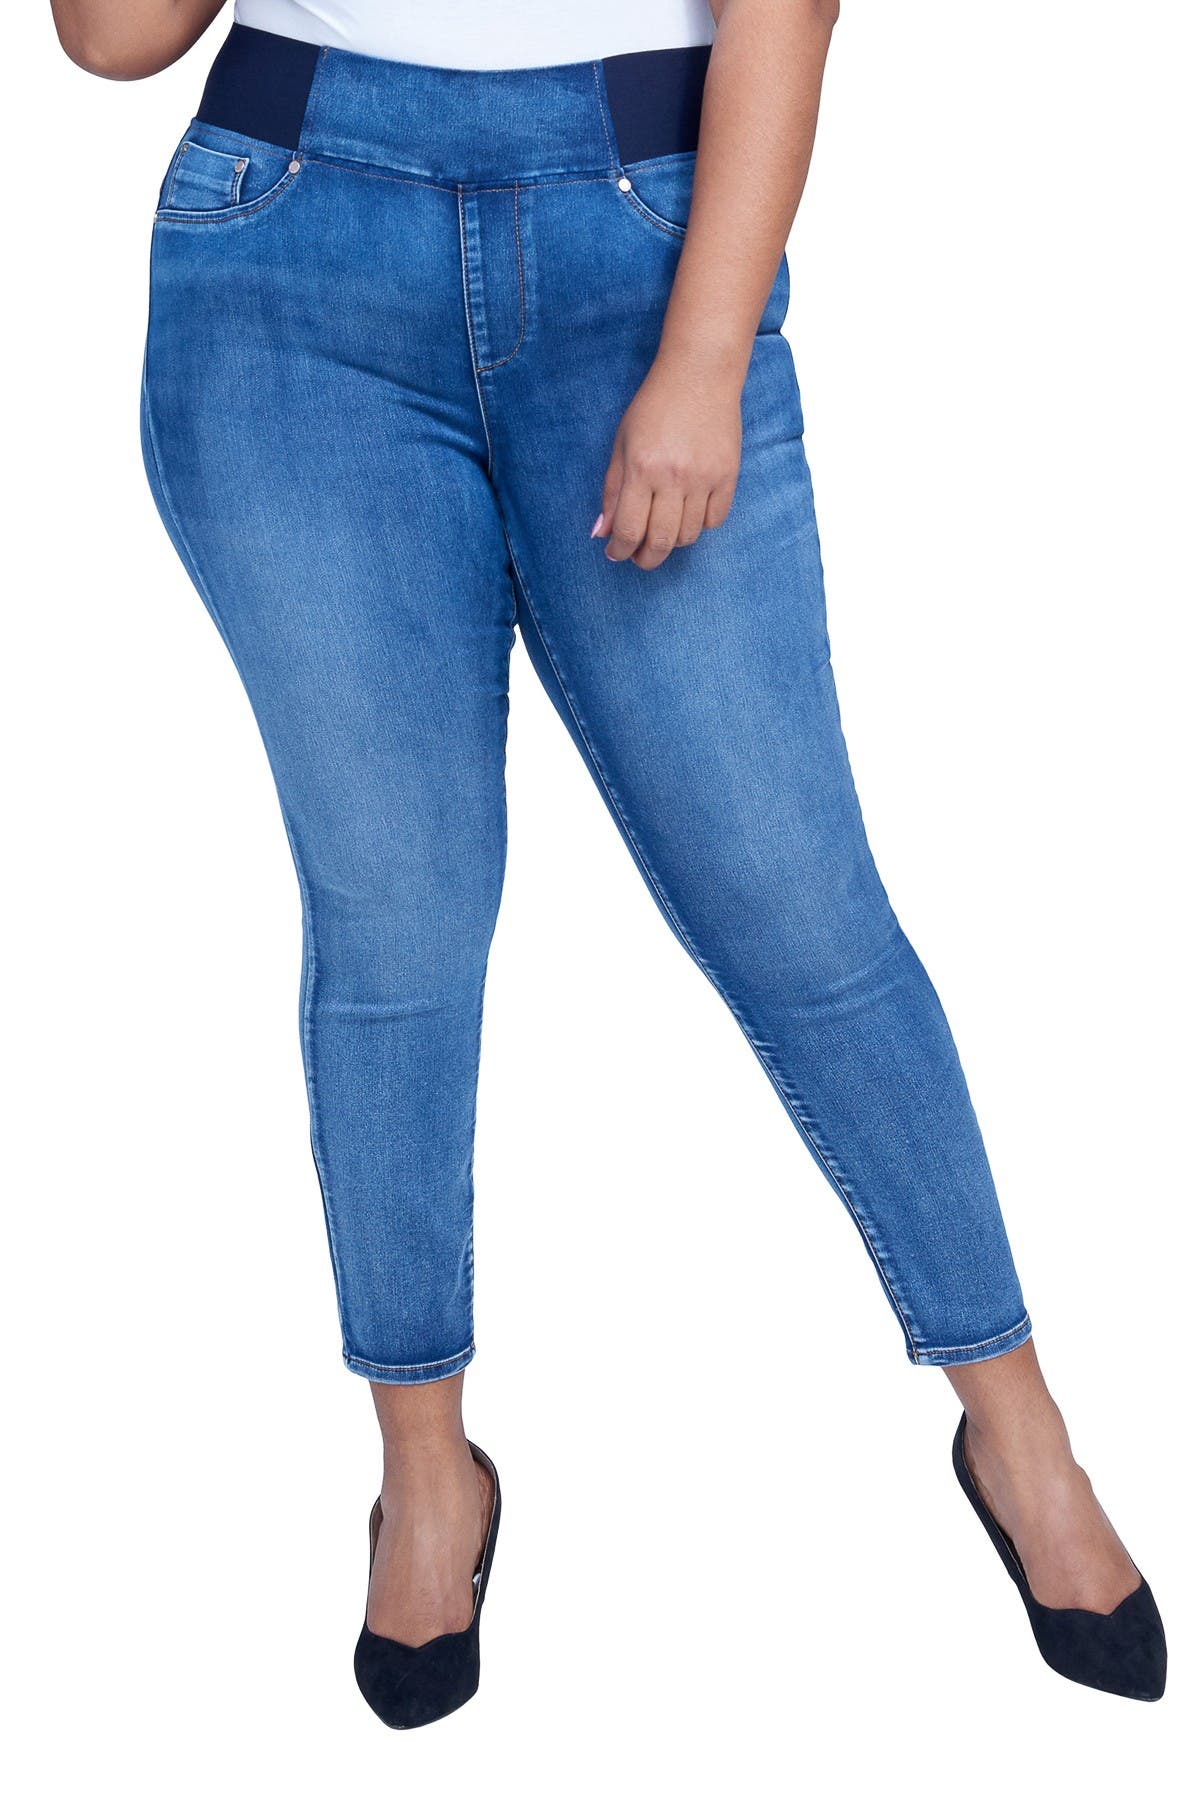 pull on bootcut jeans plus size